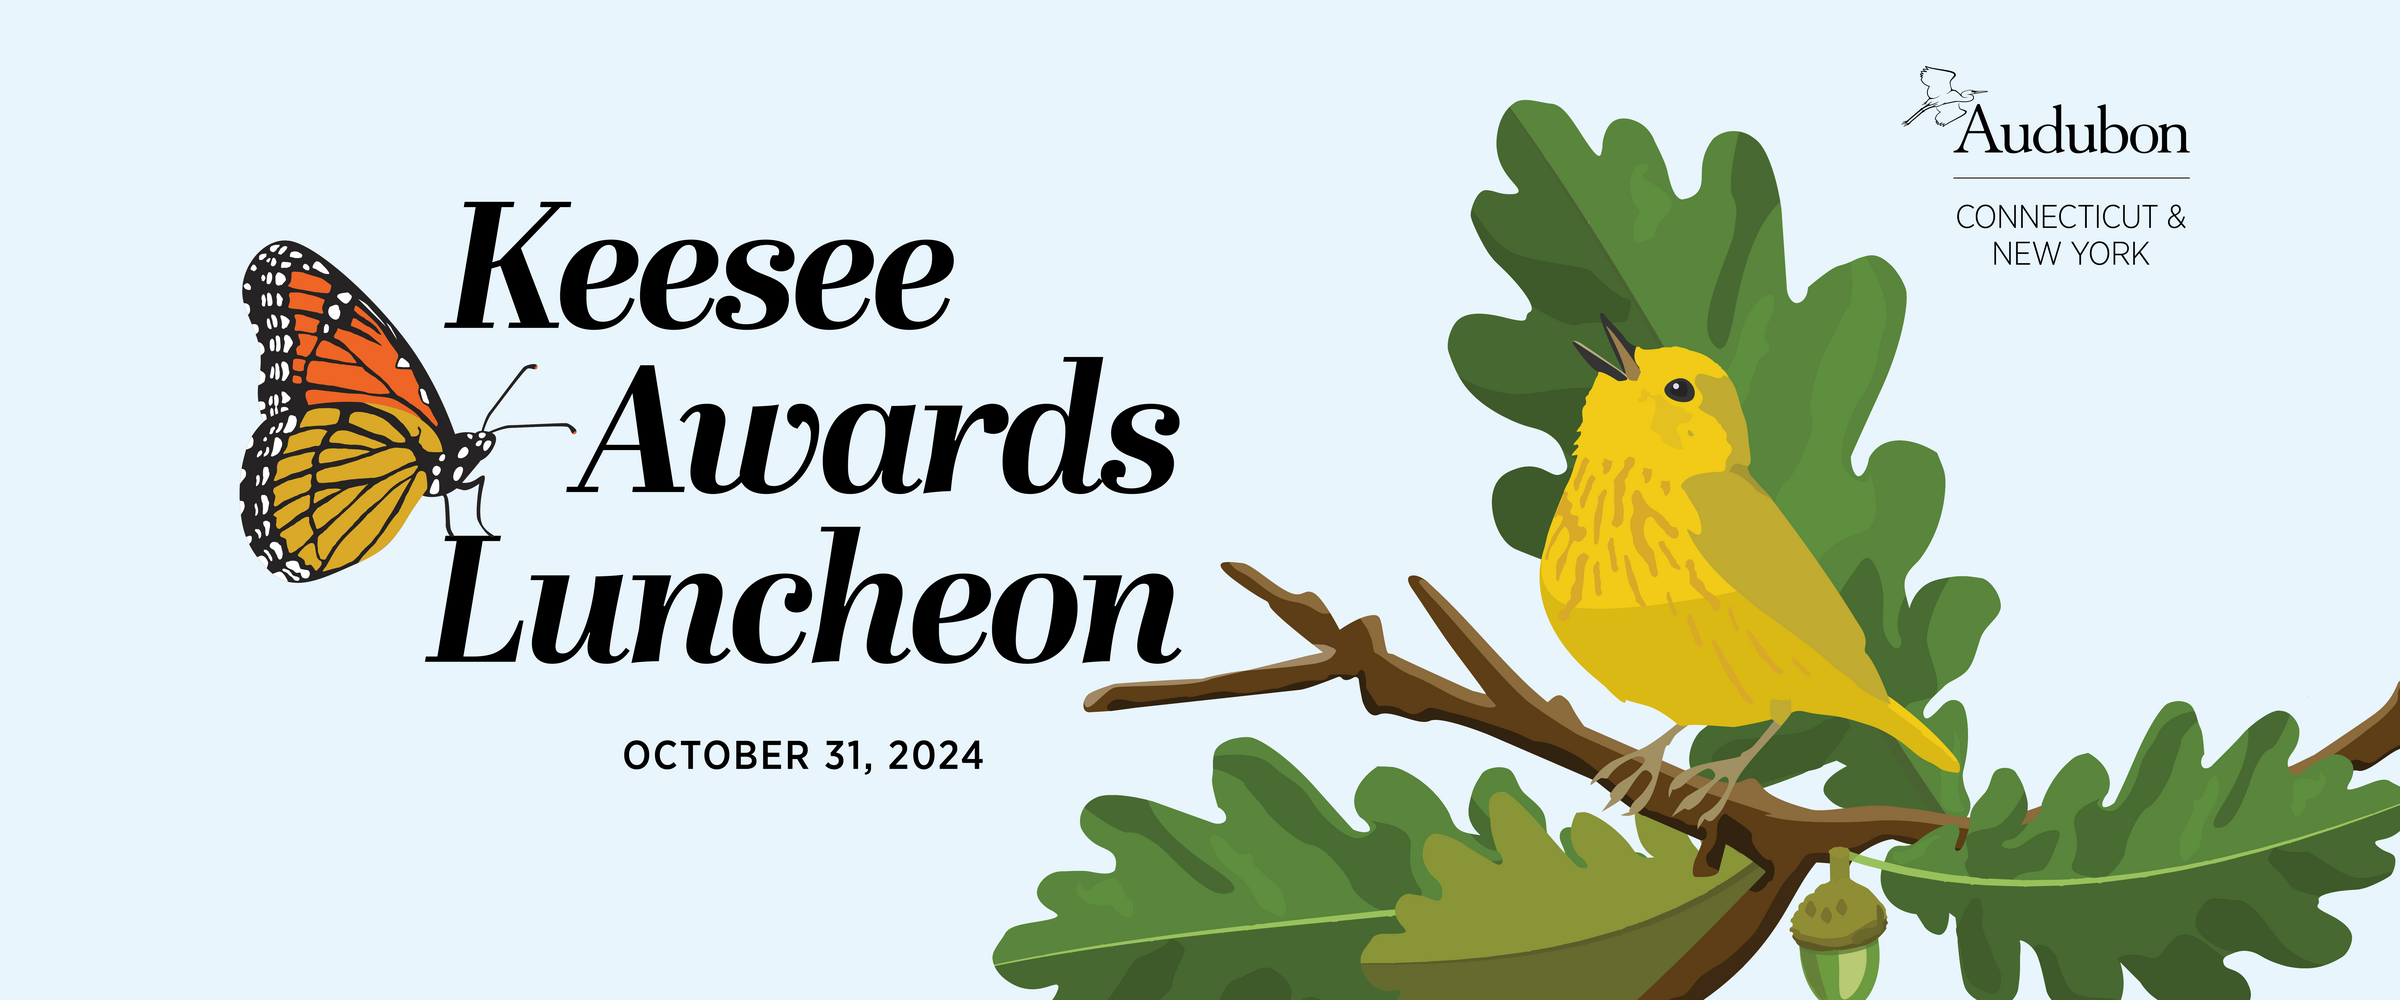 Illustration of a Yellow Warbler perched amidst oak leaves and acorns, beak open to sing. To its left is text that reads: Keesee Awards Luncheon. October 31, 2024. A Monarch Butterfly is sitting on the text.